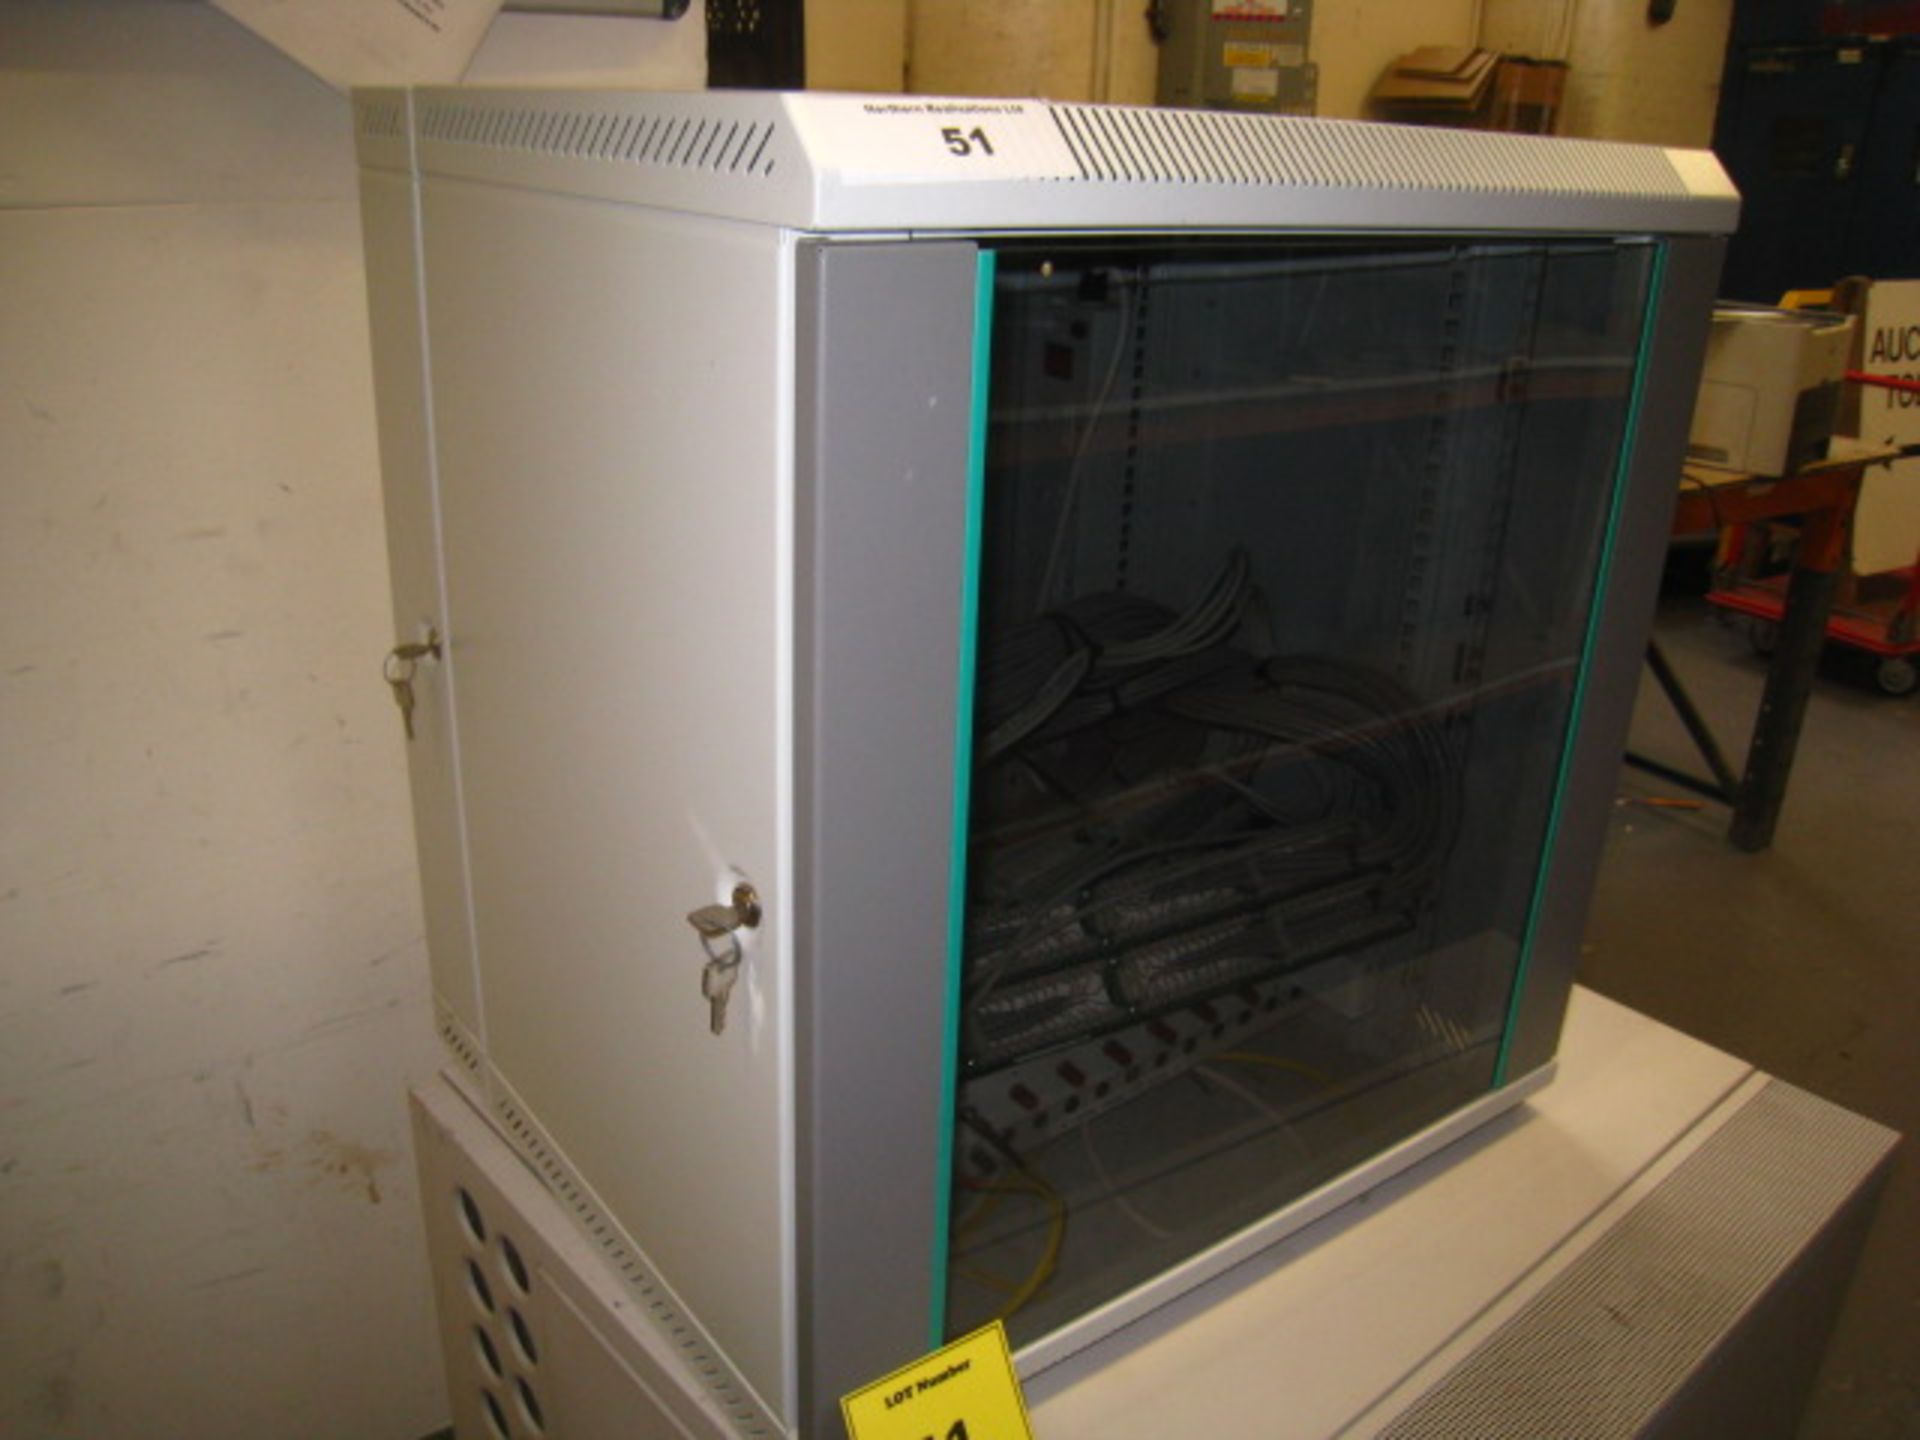 COMMS CABINET IN VERY CLEAN CONDITION WITH KEYS AND CONTAINING PATCH PANELS & A COUPLE OF